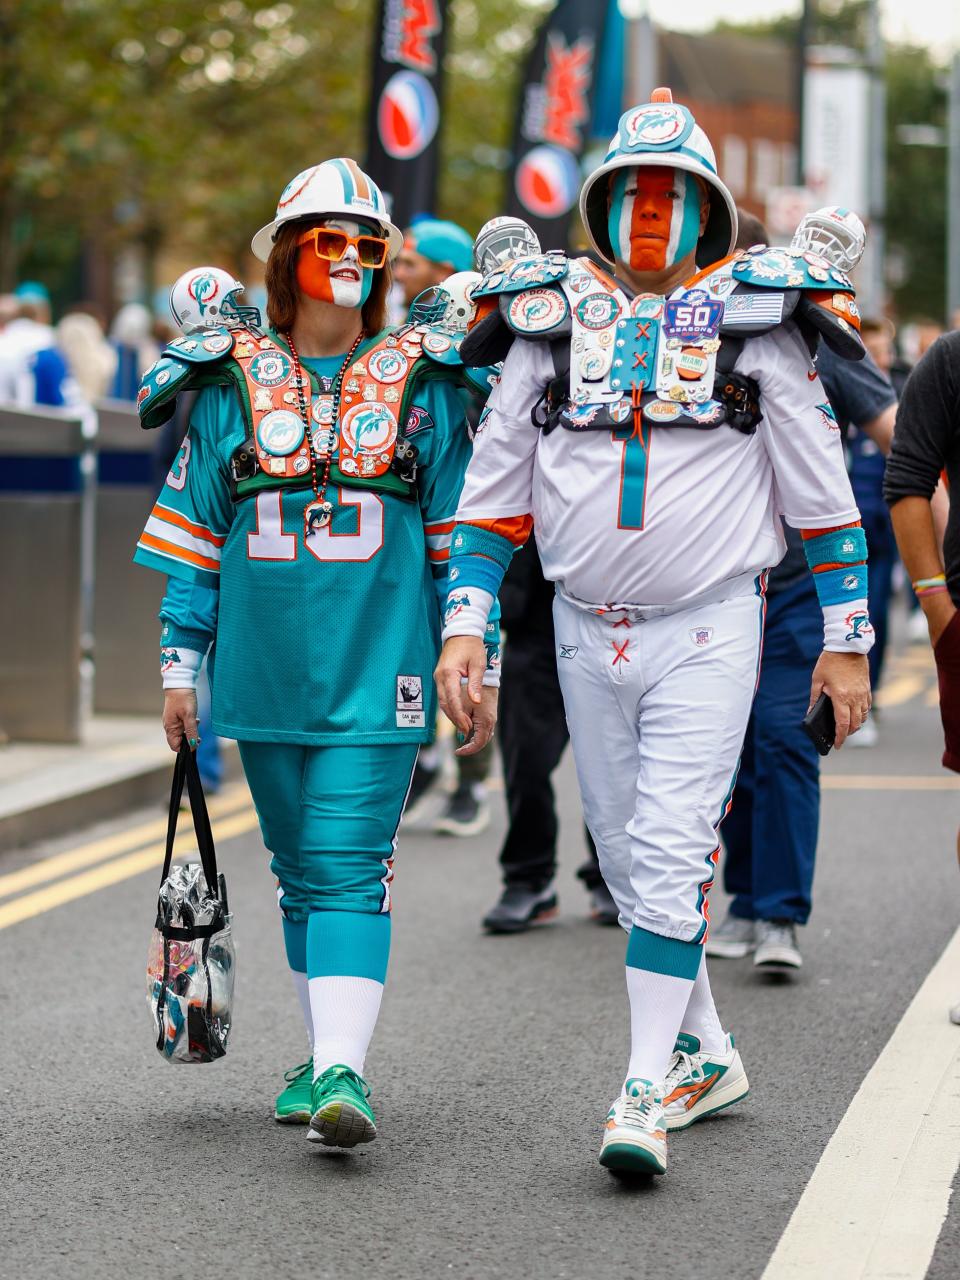 Oct 17, 2021; London, England, United Kingdom; Fans arrive for a match between the Miami Dolphins and Jacksonville Jaguars at Tottenham Hotspur Stadium. Mandatory Credit: Nathan Ray Seebeck-USA TODAY Sports